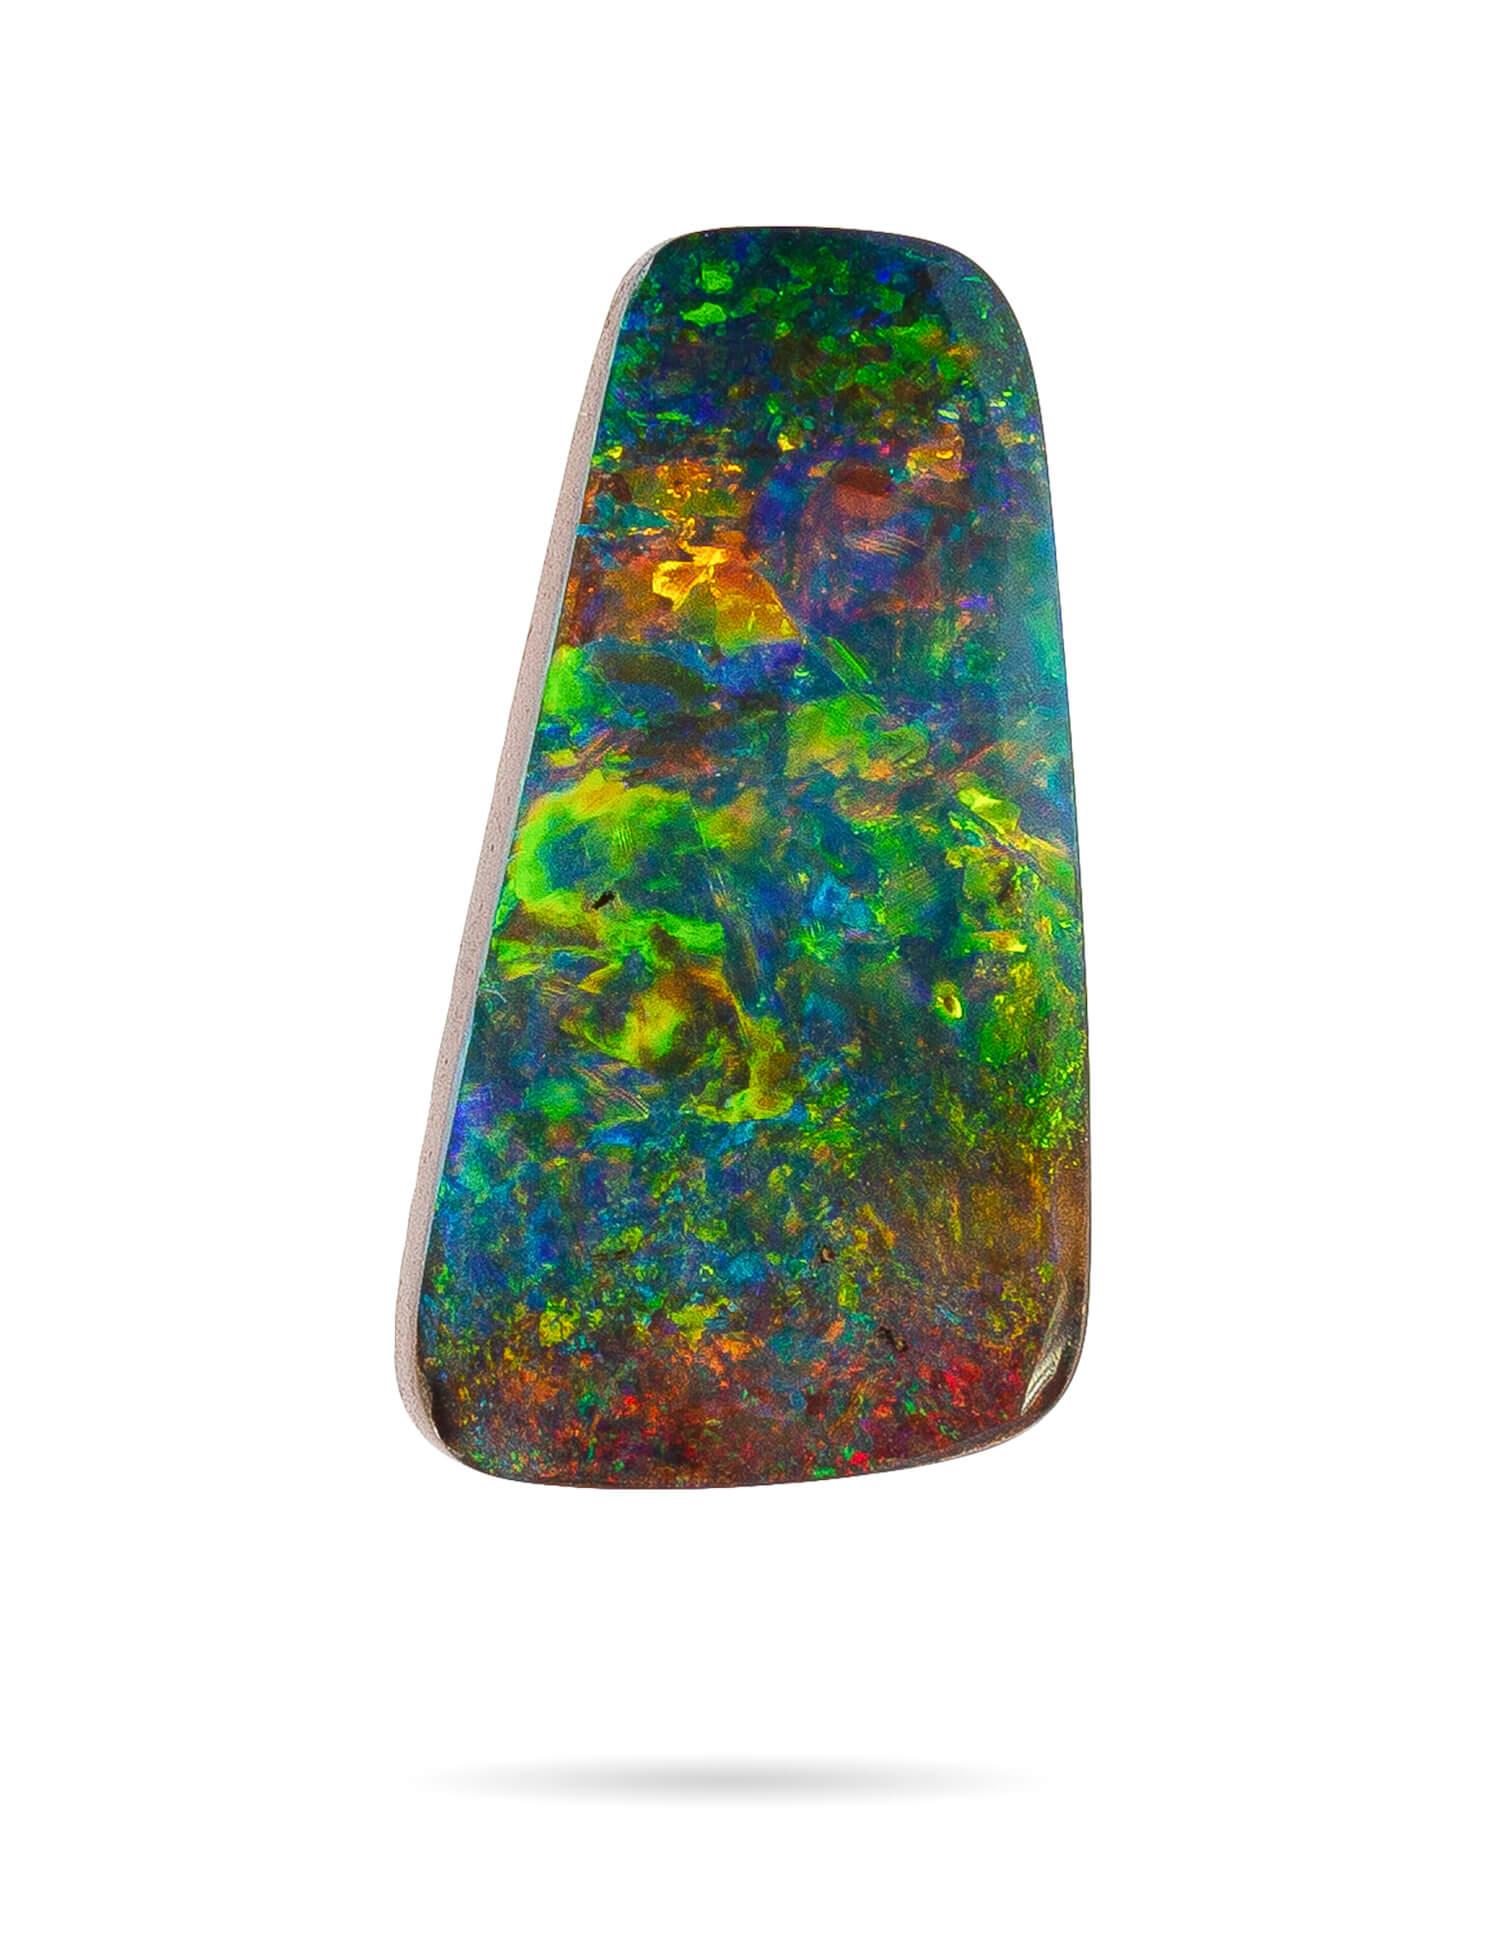 Australia is the birthplace of the most beautiful precious opal gemstones in the world. Fine Australian opals mesmerise with colours changing and shifting the gem moves with an unrivalled vibrancy.

This boulder opal was ethically sourced from